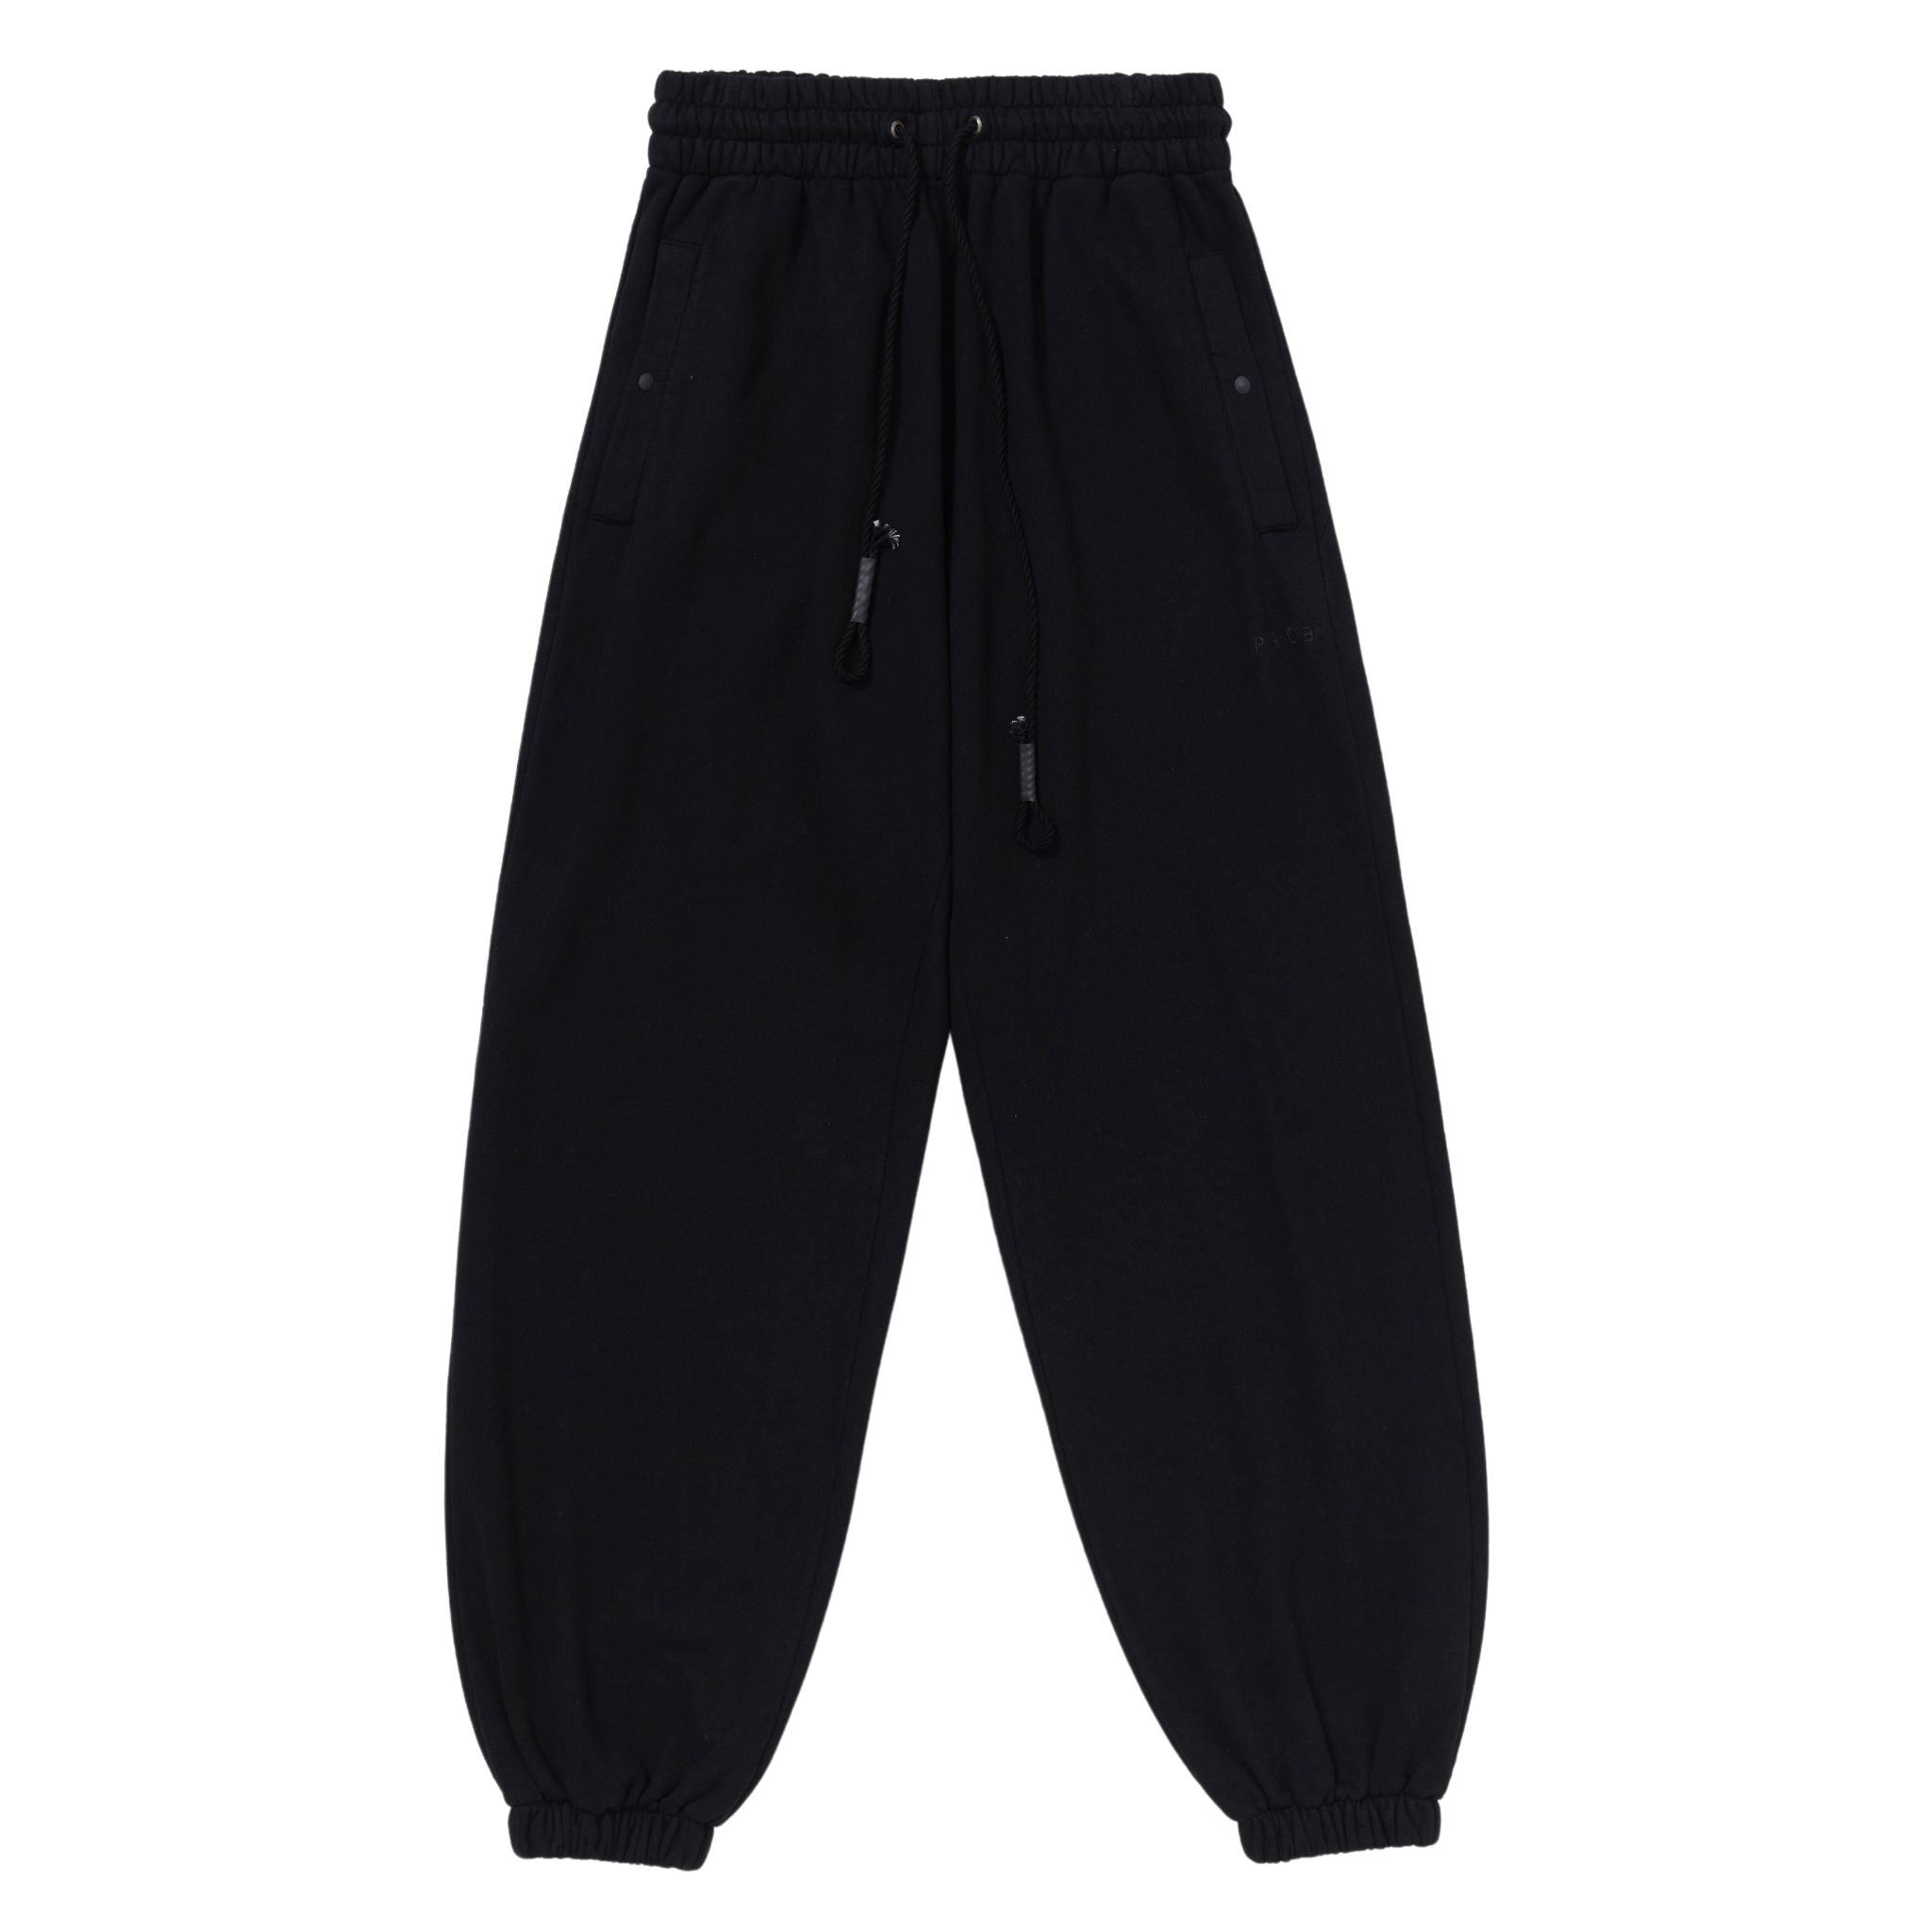 PACE - X-Phora Sweatpants "Black" - THE GAME